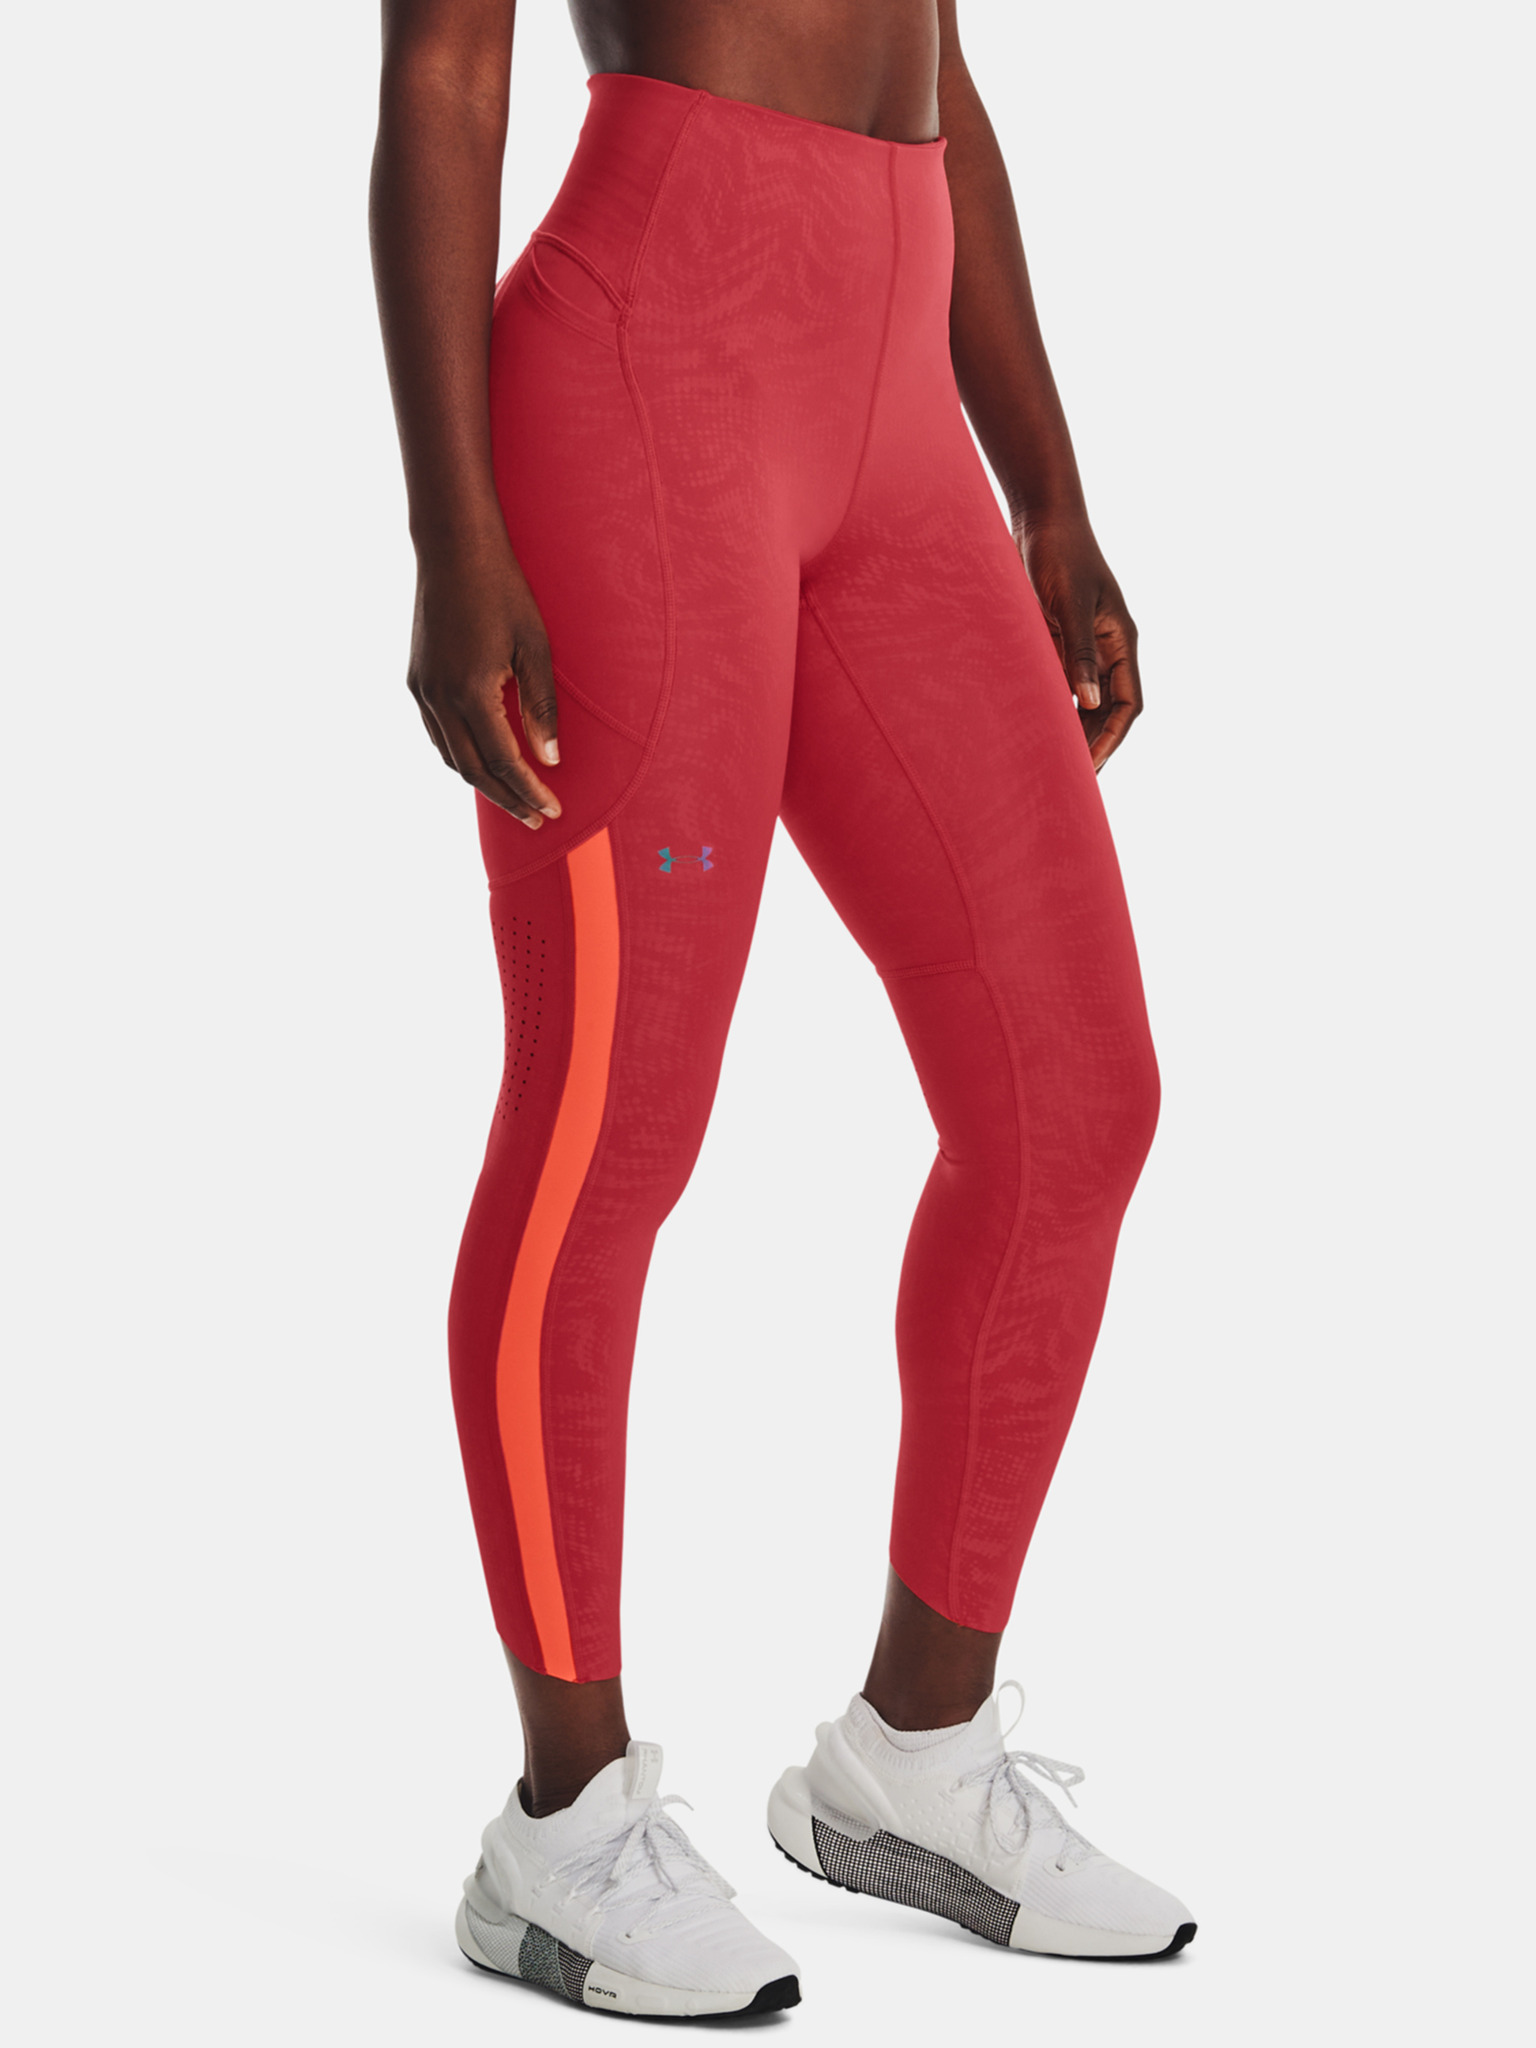 Under Armour Women's Fly Fast 2.0 Print Tights (League  Red/Brilliance/Reflective, Size L)